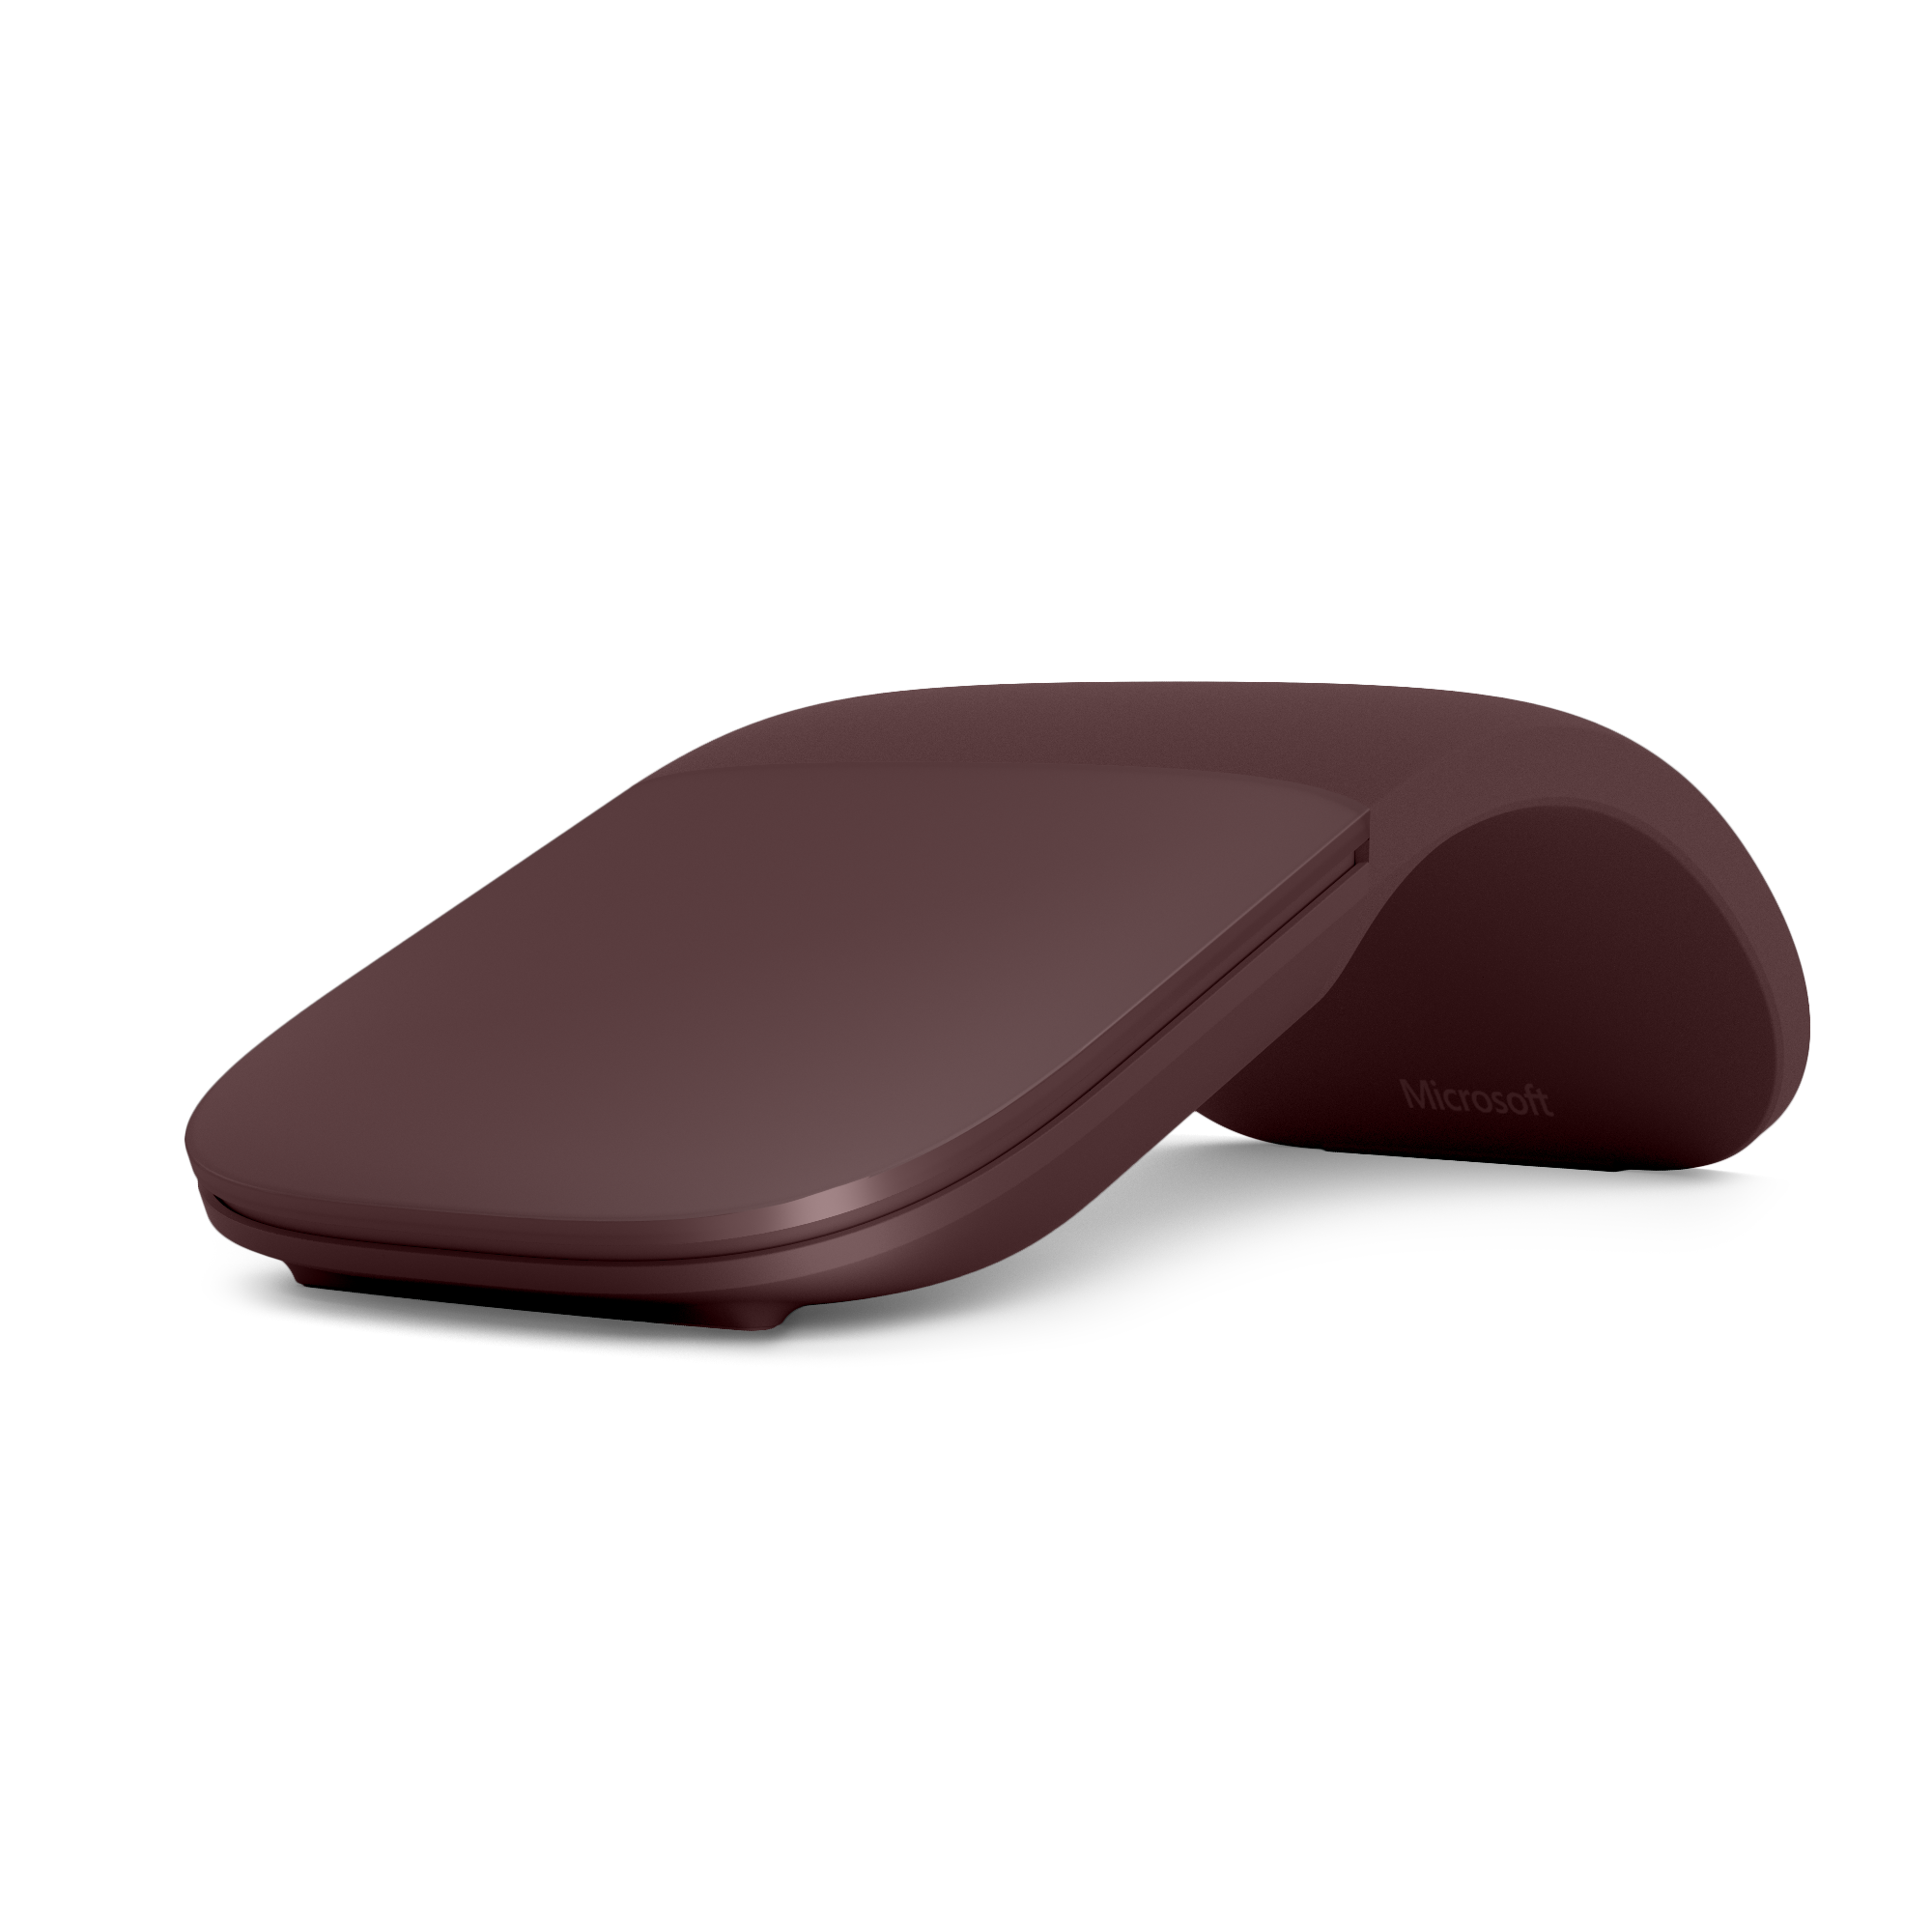 hand Surface Microsoft your #MicrosoftEDU designed to Burgundy, in Event conform to Arc – Mouse